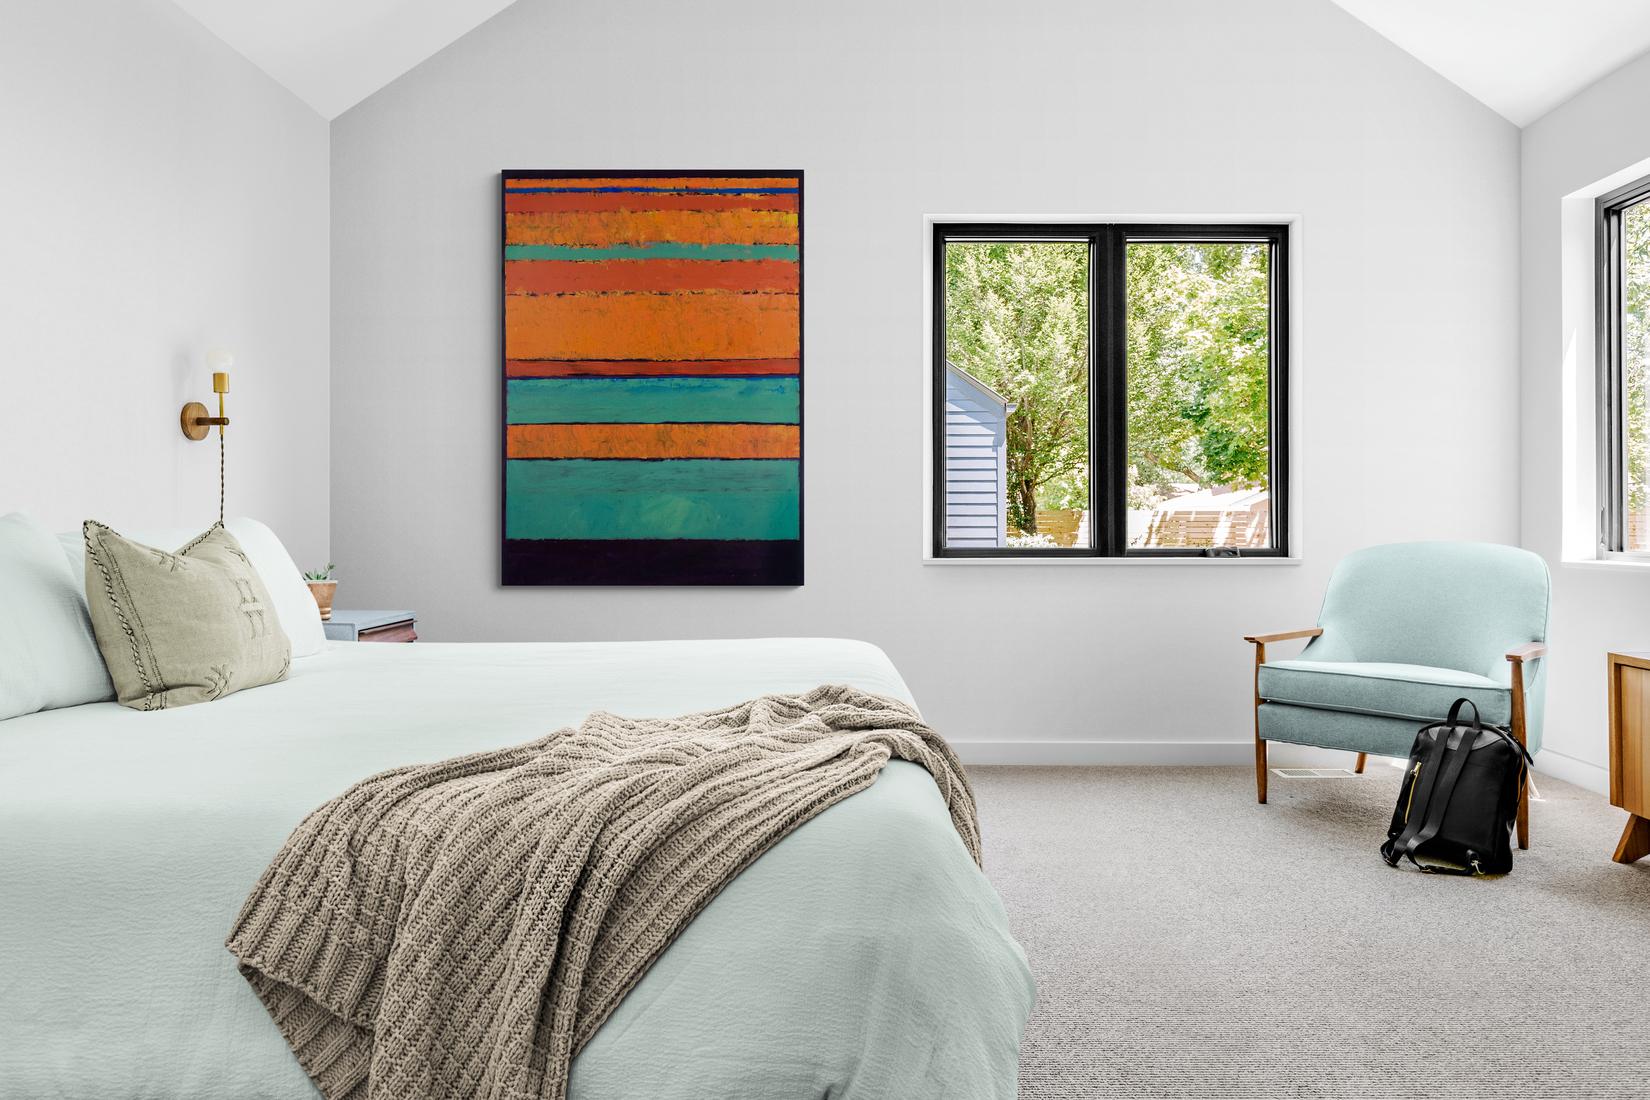 A scaffold of dark violet gives structure to painterly hot orange and teal bands in this confident abstract canvas by David Sorensen. The curated strata of fresh  colors points to an ocean horizon at sunrise.

Through his painterly modern